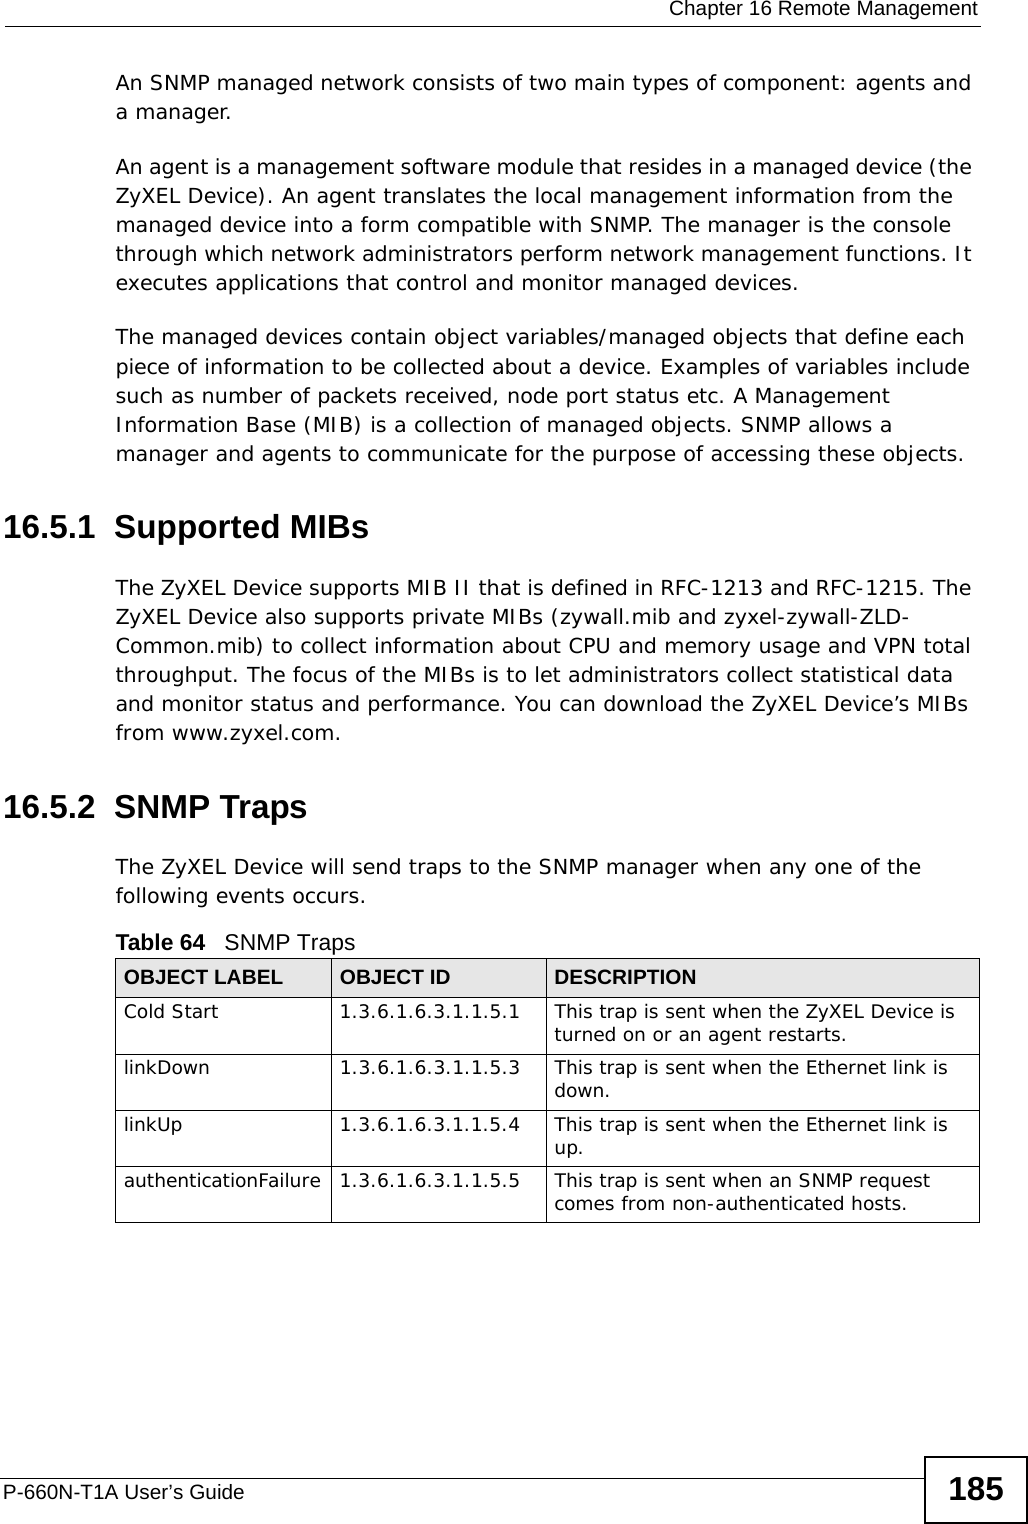  Chapter 16 Remote ManagementP-660N-T1A User’s Guide 185An SNMP managed network consists of two main types of component: agents and a manager. An agent is a management software module that resides in a managed device (the ZyXEL Device). An agent translates the local management information from the managed device into a form compatible with SNMP. The manager is the console through which network administrators perform network management functions. It executes applications that control and monitor managed devices. The managed devices contain object variables/managed objects that define each piece of information to be collected about a device. Examples of variables include such as number of packets received, node port status etc. A Management Information Base (MIB) is a collection of managed objects. SNMP allows a manager and agents to communicate for the purpose of accessing these objects.16.5.1  Supported MIBsThe ZyXEL Device supports MIB II that is defined in RFC-1213 and RFC-1215. The ZyXEL Device also supports private MIBs (zywall.mib and zyxel-zywall-ZLD-Common.mib) to collect information about CPU and memory usage and VPN total throughput. The focus of the MIBs is to let administrators collect statistical data and monitor status and performance. You can download the ZyXEL Device’s MIBs from www.zyxel.com.16.5.2  SNMP TrapsThe ZyXEL Device will send traps to the SNMP manager when any one of the following events occurs.Table 64   SNMP TrapsOBJECT LABEL OBJECT ID DESCRIPTIONCold Start 1.3.6.1.6.3.1.1.5.1 This trap is sent when the ZyXEL Device is turned on or an agent restarts.linkDown 1.3.6.1.6.3.1.1.5.3 This trap is sent when the Ethernet link is down.linkUp 1.3.6.1.6.3.1.1.5.4 This trap is sent when the Ethernet link is up.authenticationFailure 1.3.6.1.6.3.1.1.5.5 This trap is sent when an SNMP request comes from non-authenticated hosts.